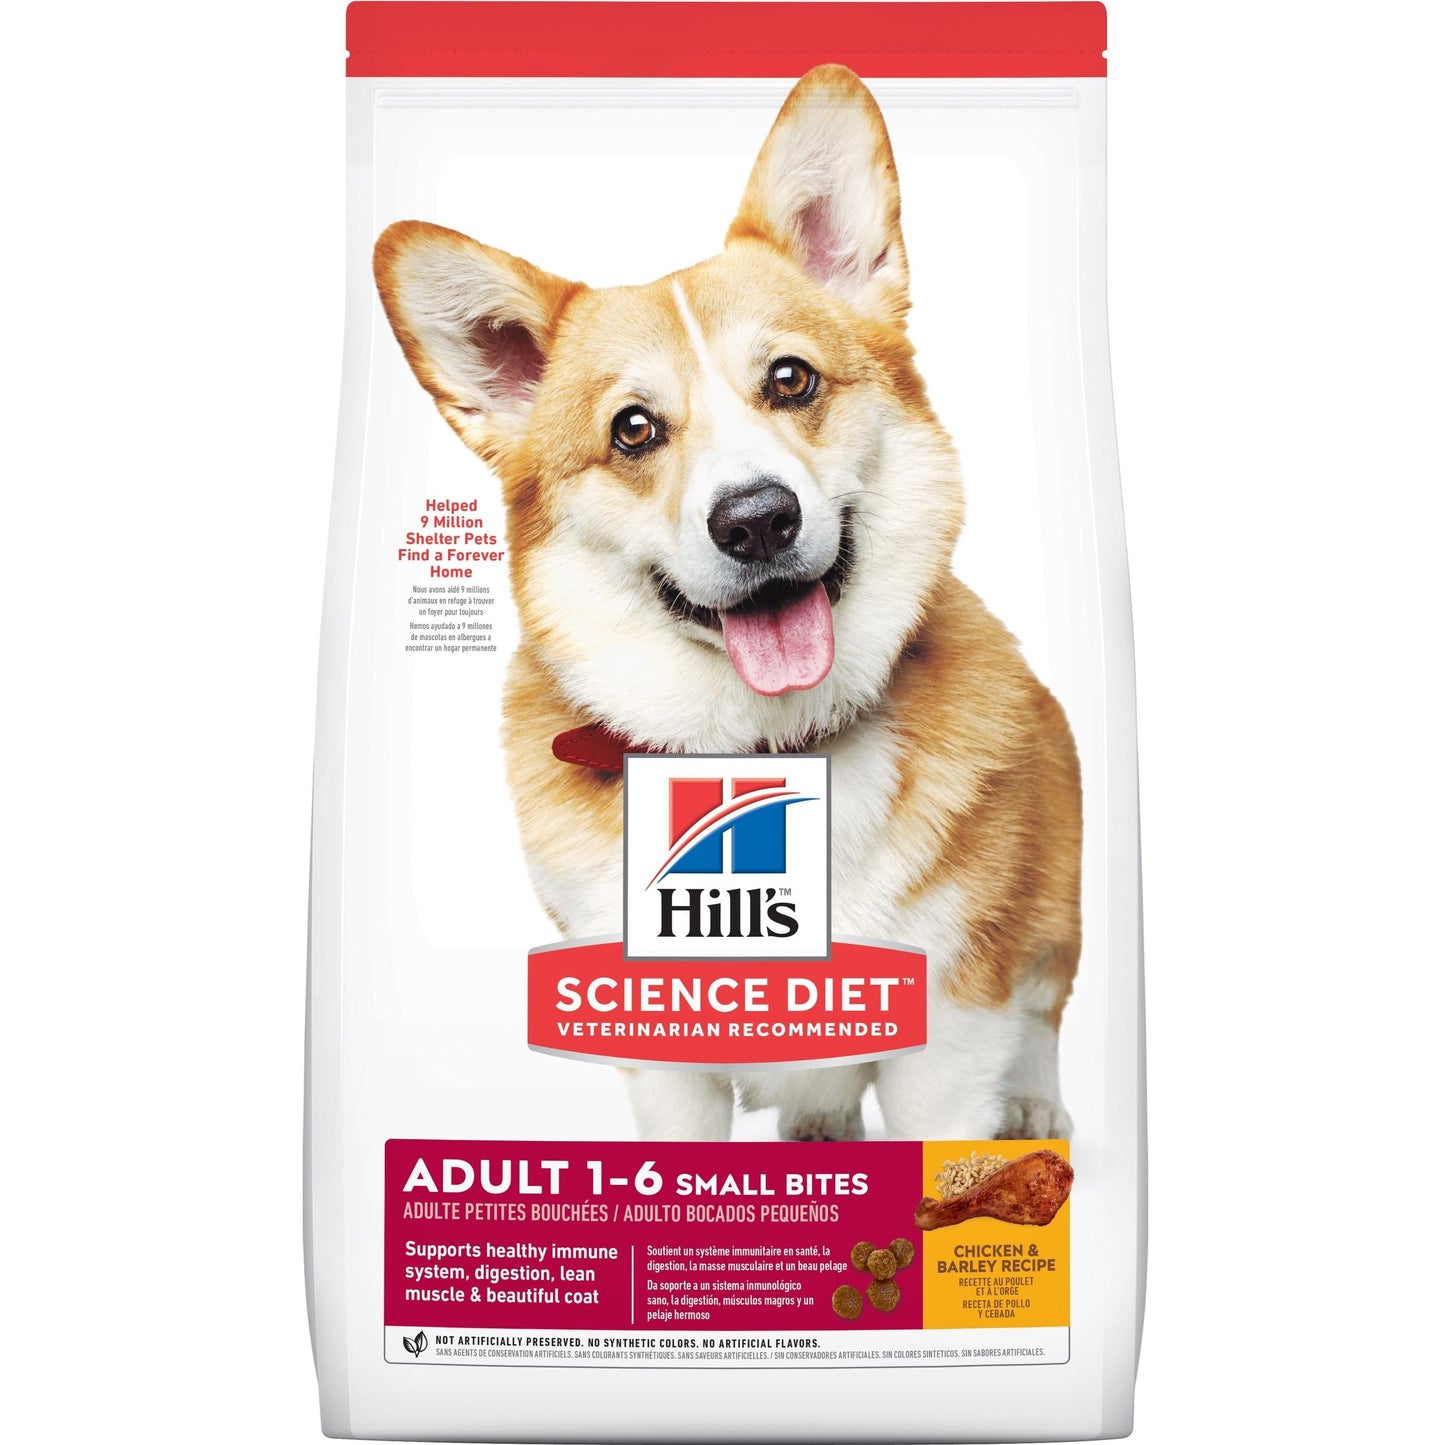 Hill's Science Diet Small Bites Dog Food